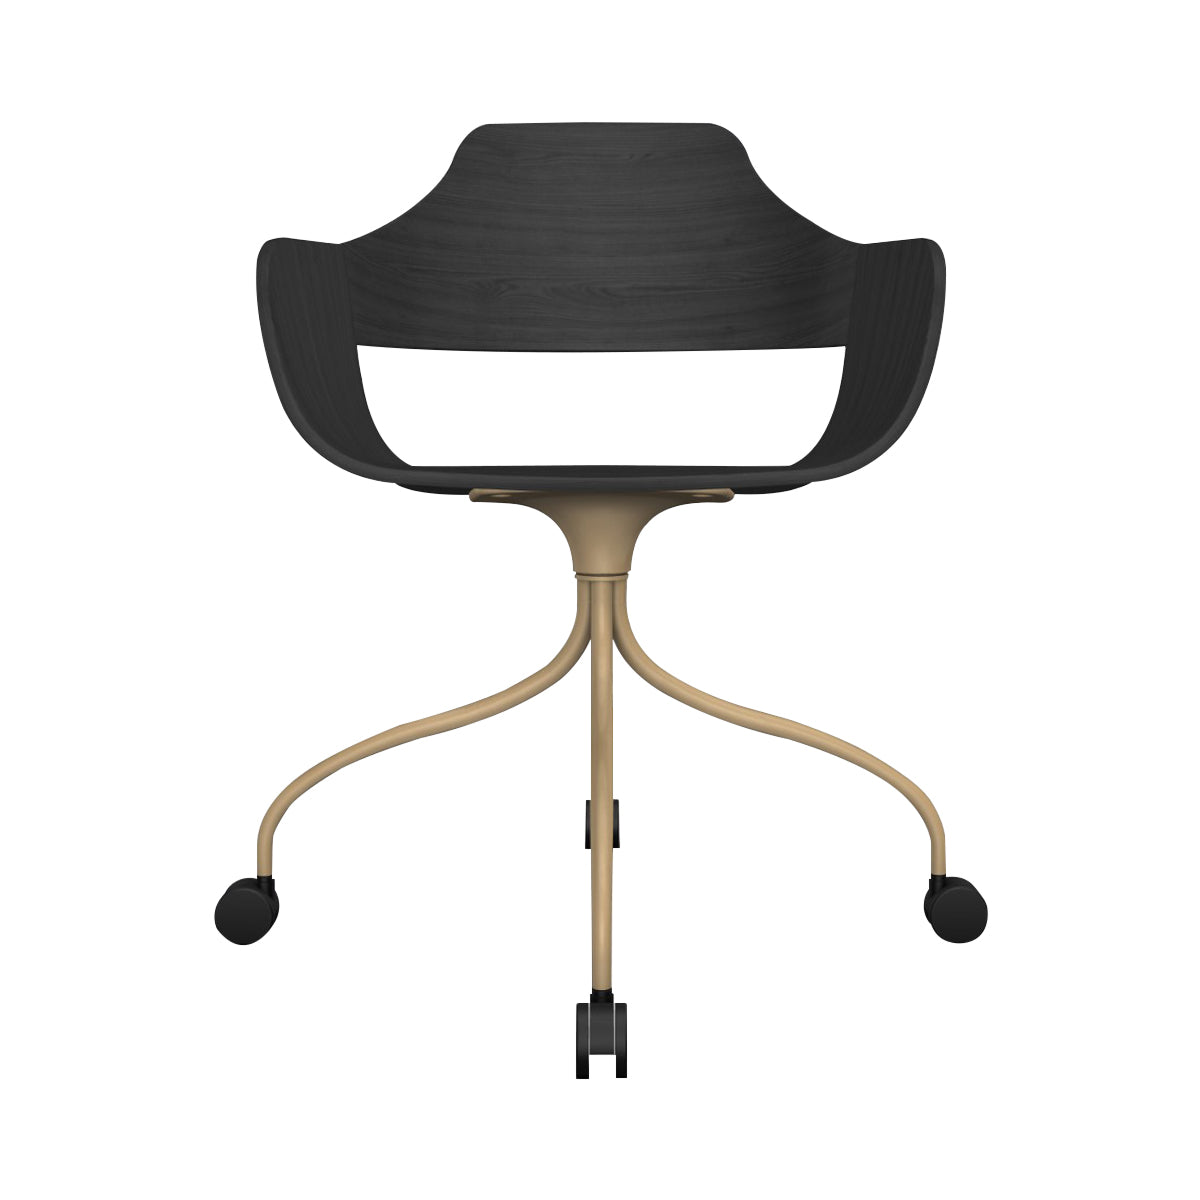 Showtime Chair with Wheel: Ash Stained Black + Beige